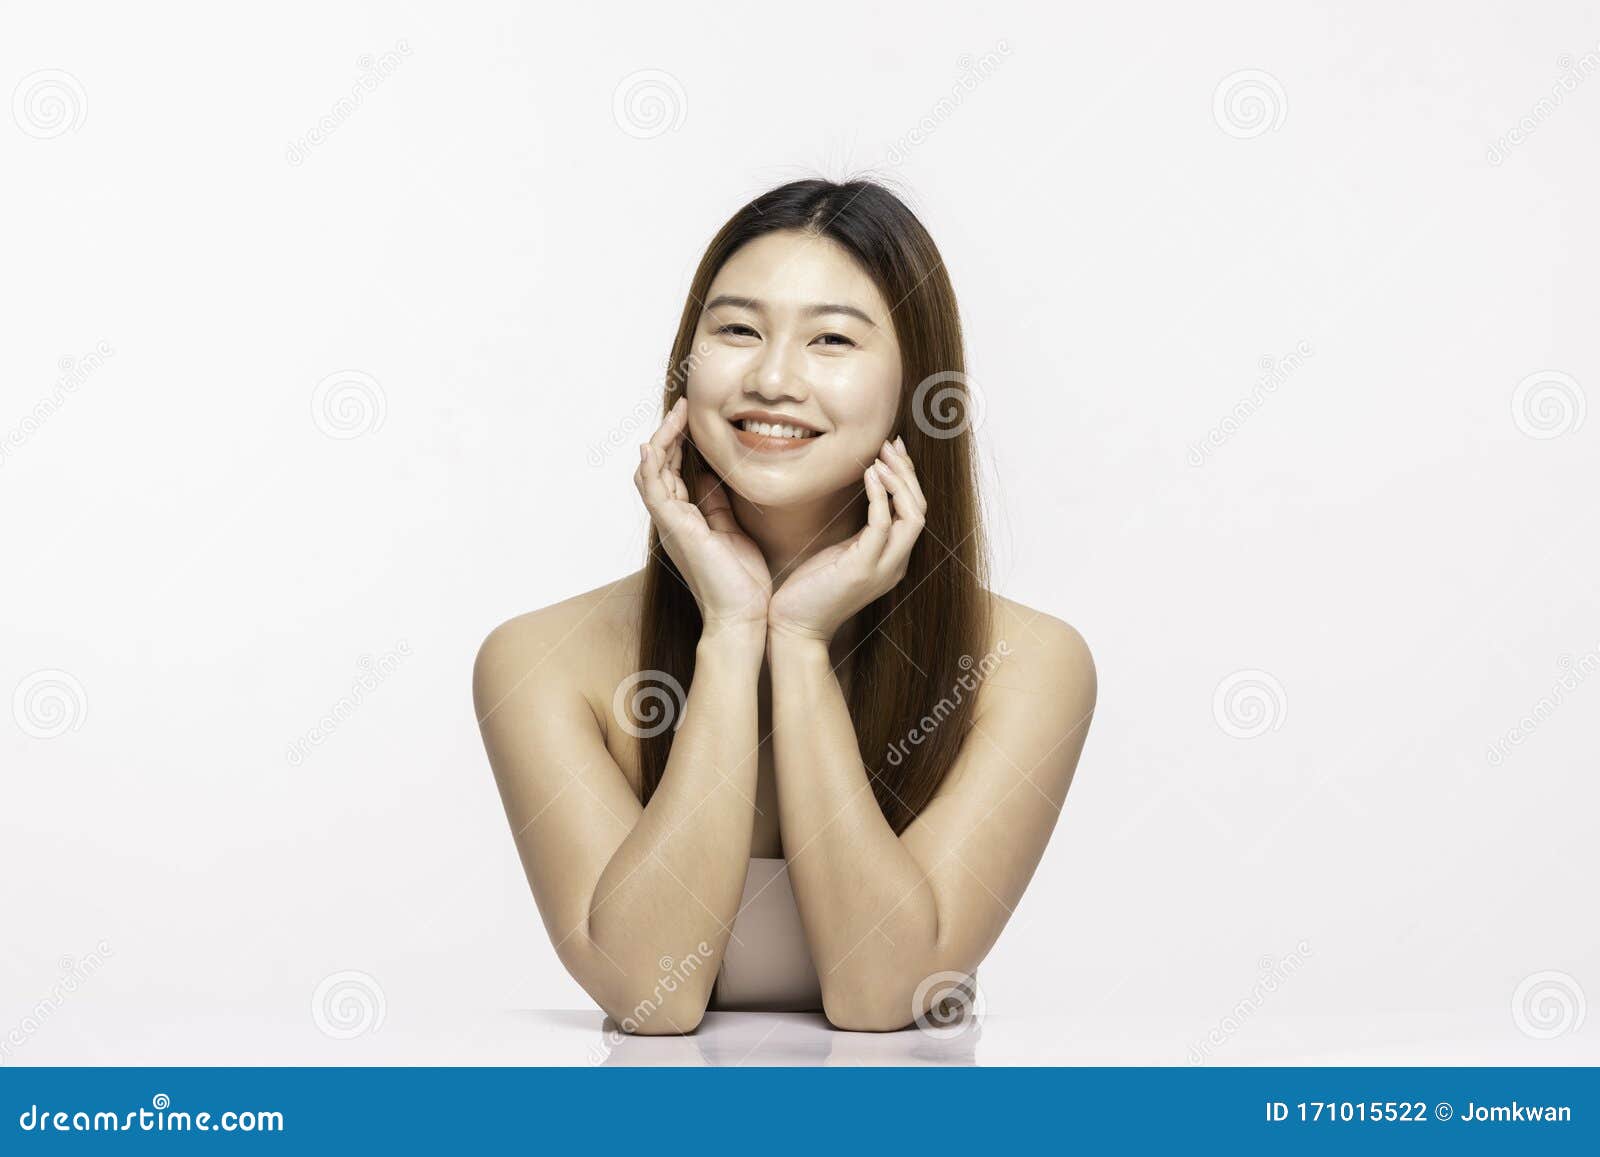 https://thumbs.dreamstime.com/z/beautiful-attractive-charming-asian-young-woman-smile-white-teeth-touching-soft-cheek-beautiful-attractive-charming-asian-171015522.jpg